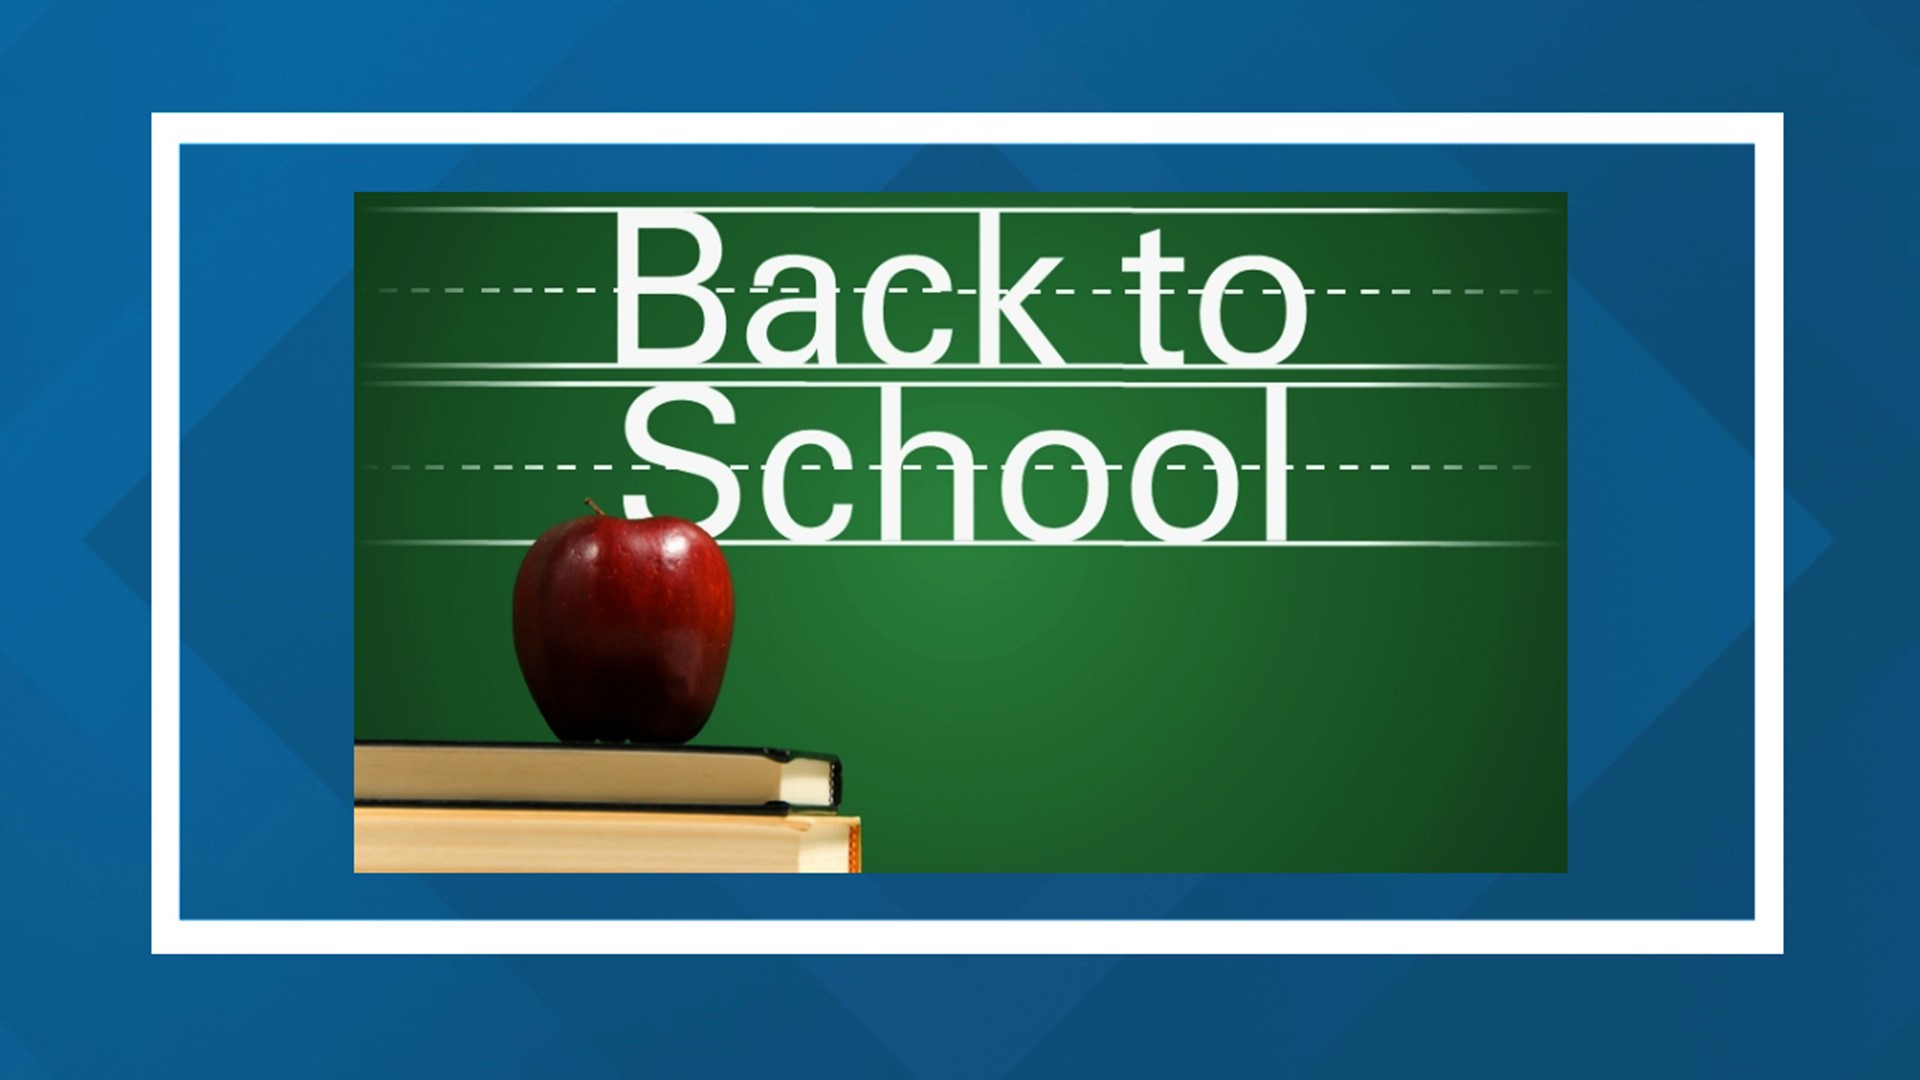 School districts across our area are still trying to figure out what school will look like for students come the fall. So, is back to school shopping worth it?